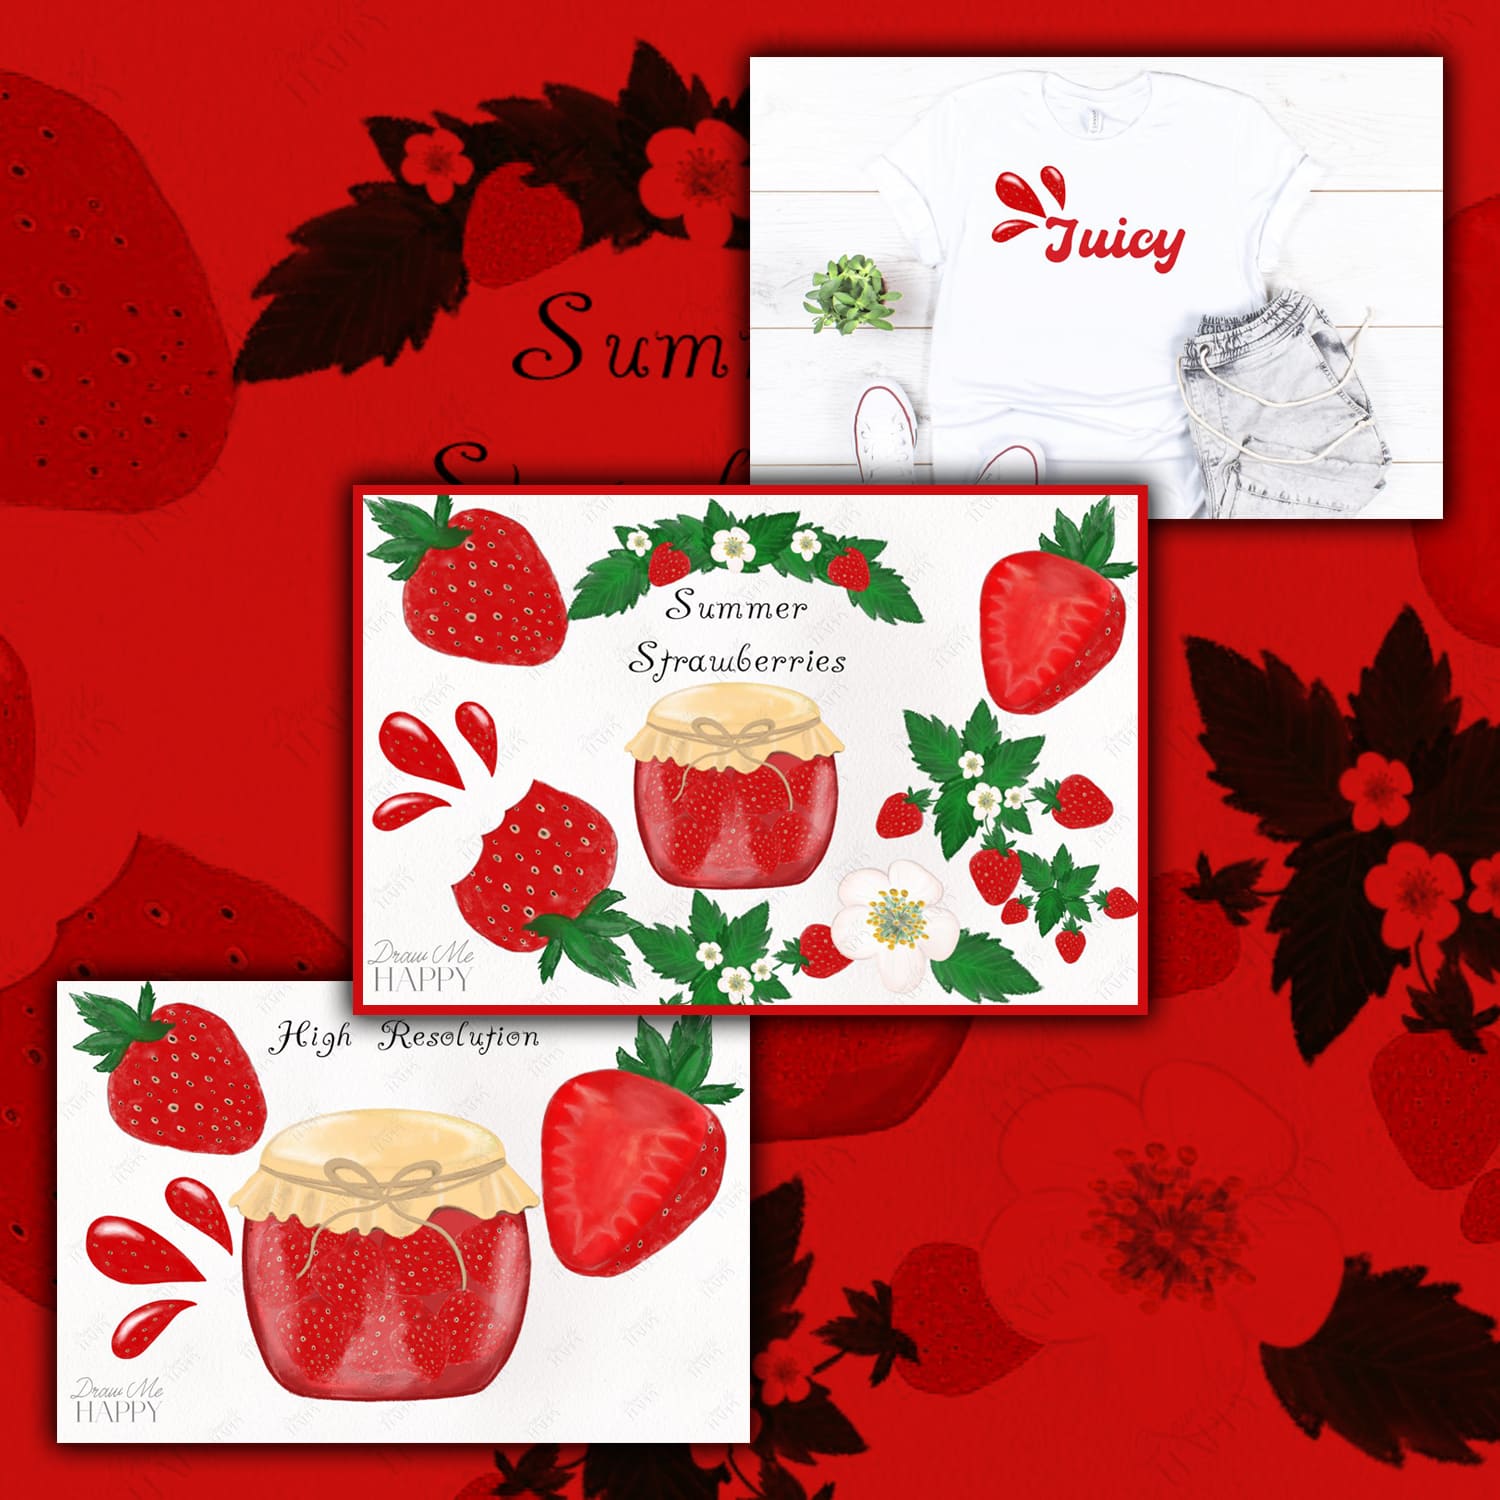 Three slides are placed diagonally with the image of strawberries and strawberry jam.